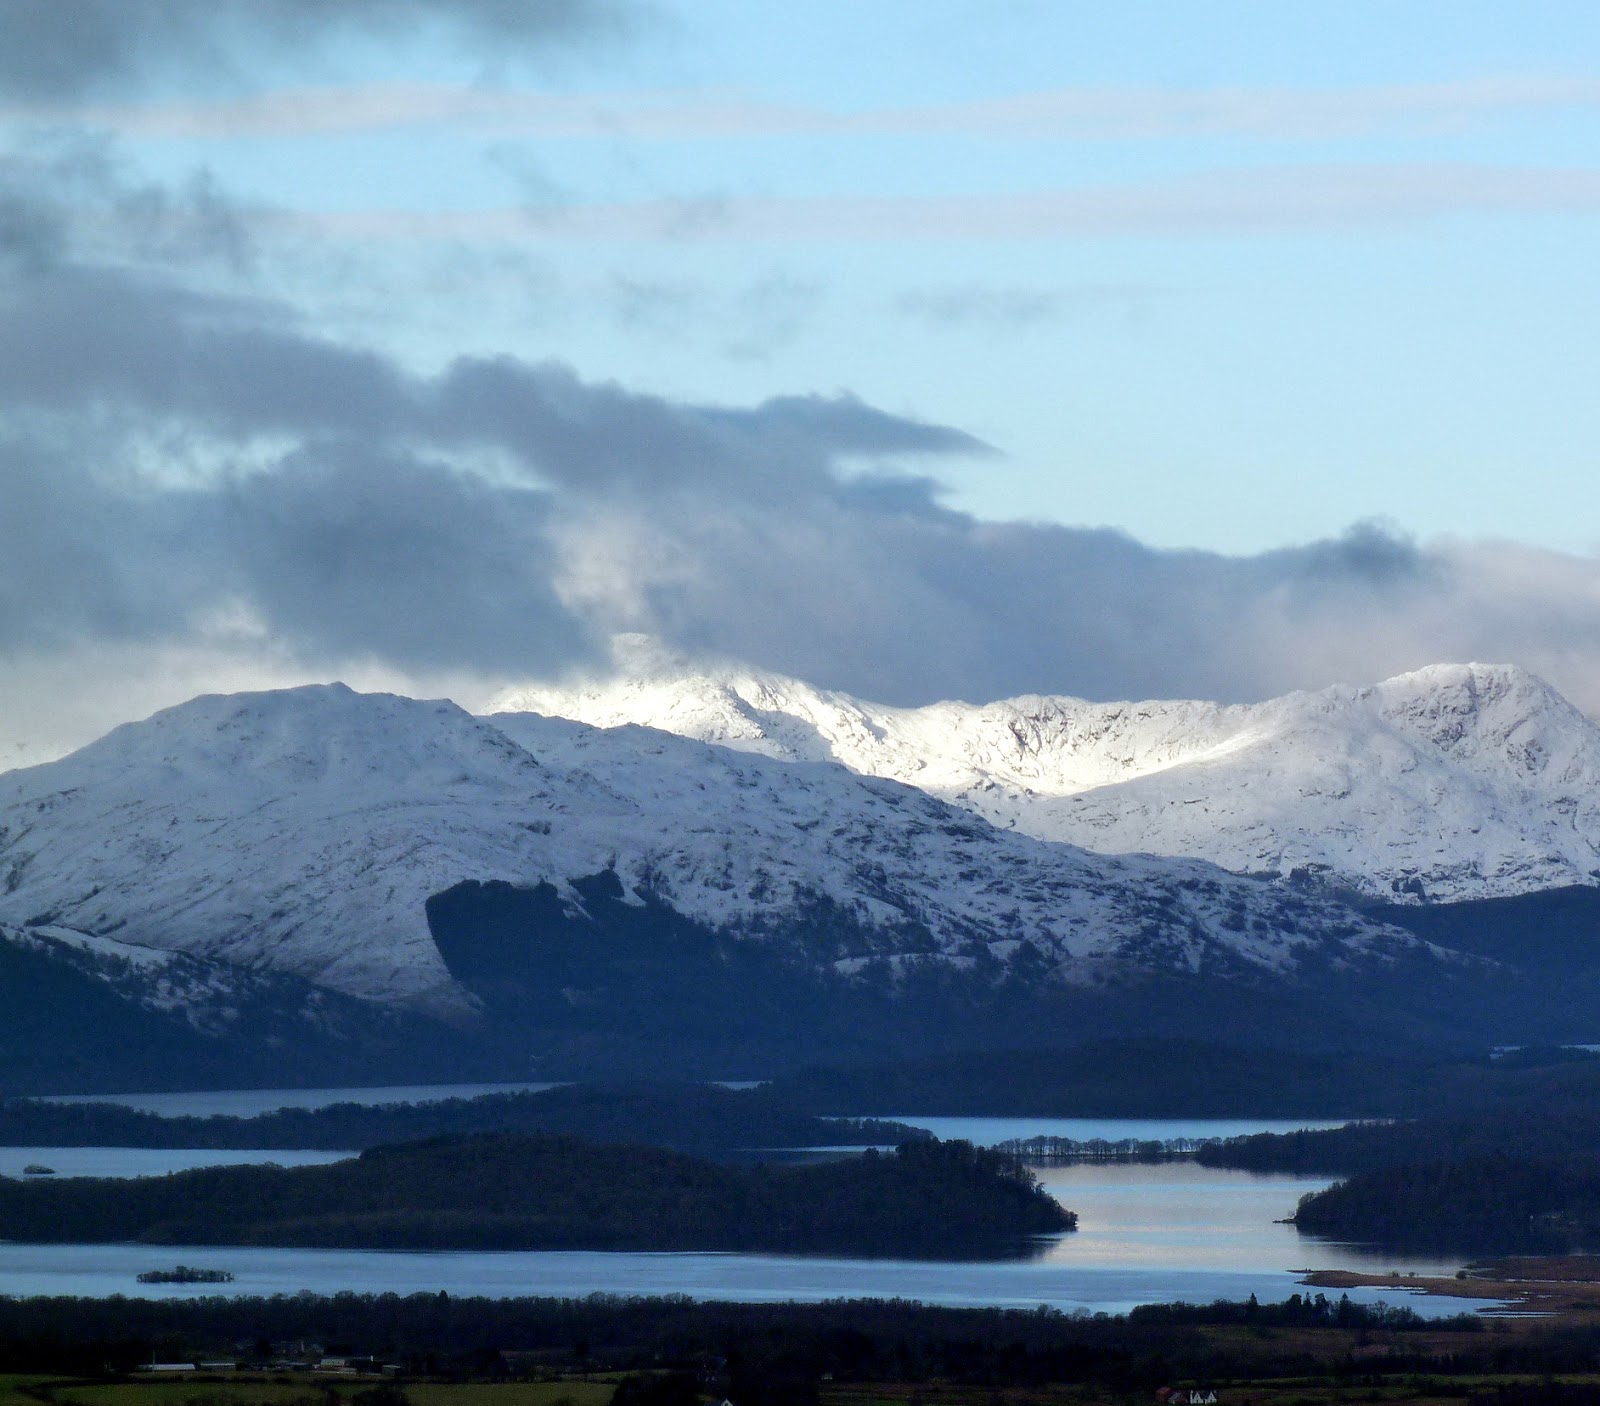 View of Loch Lomond from Queen's View